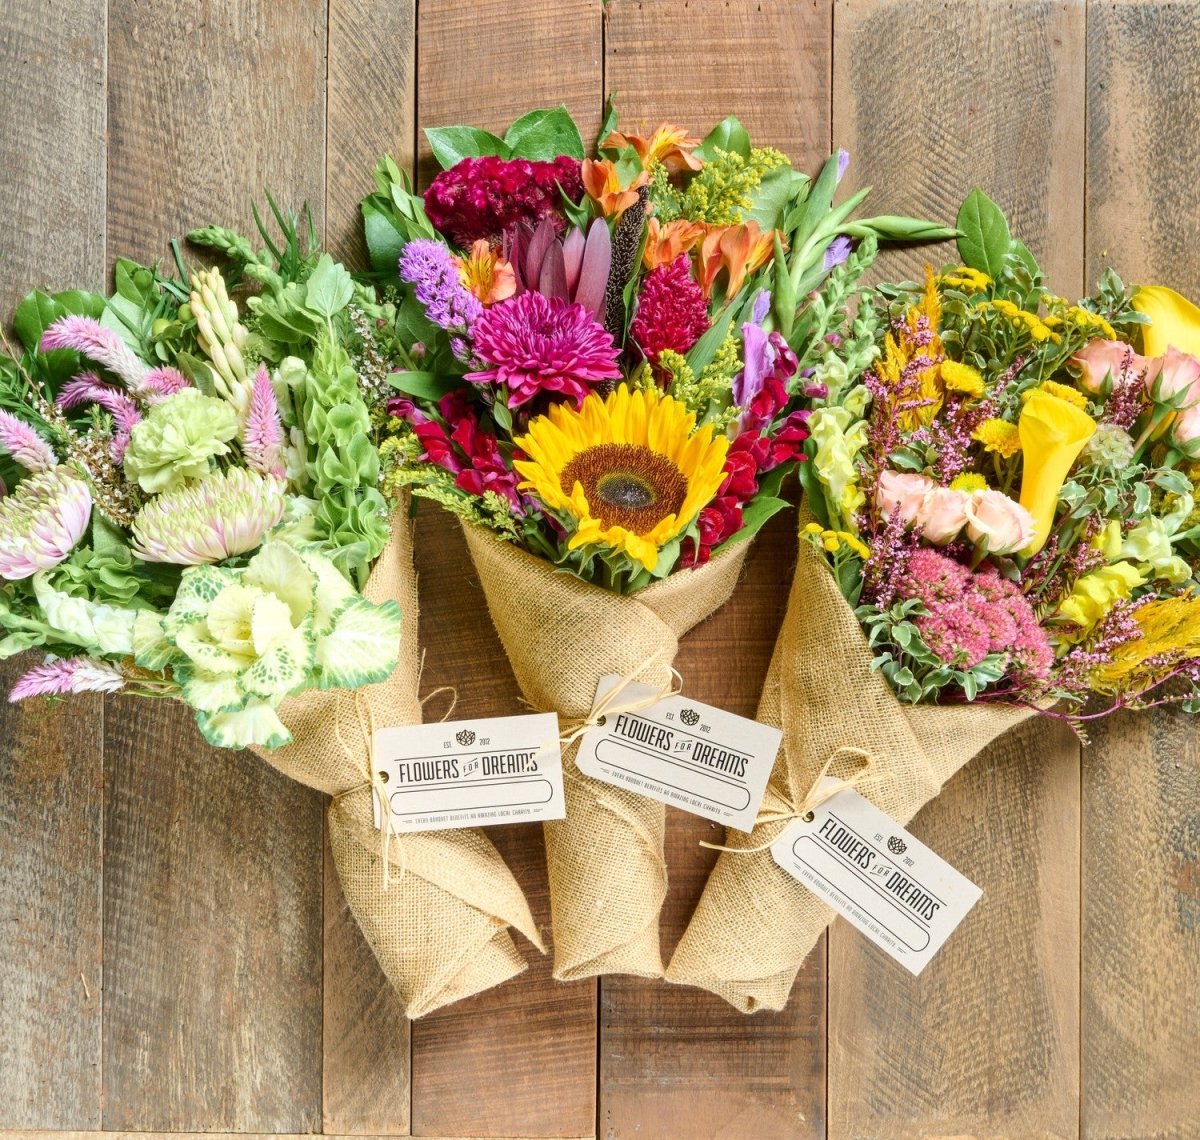 Artisan Subscription - Flowers for Dreams